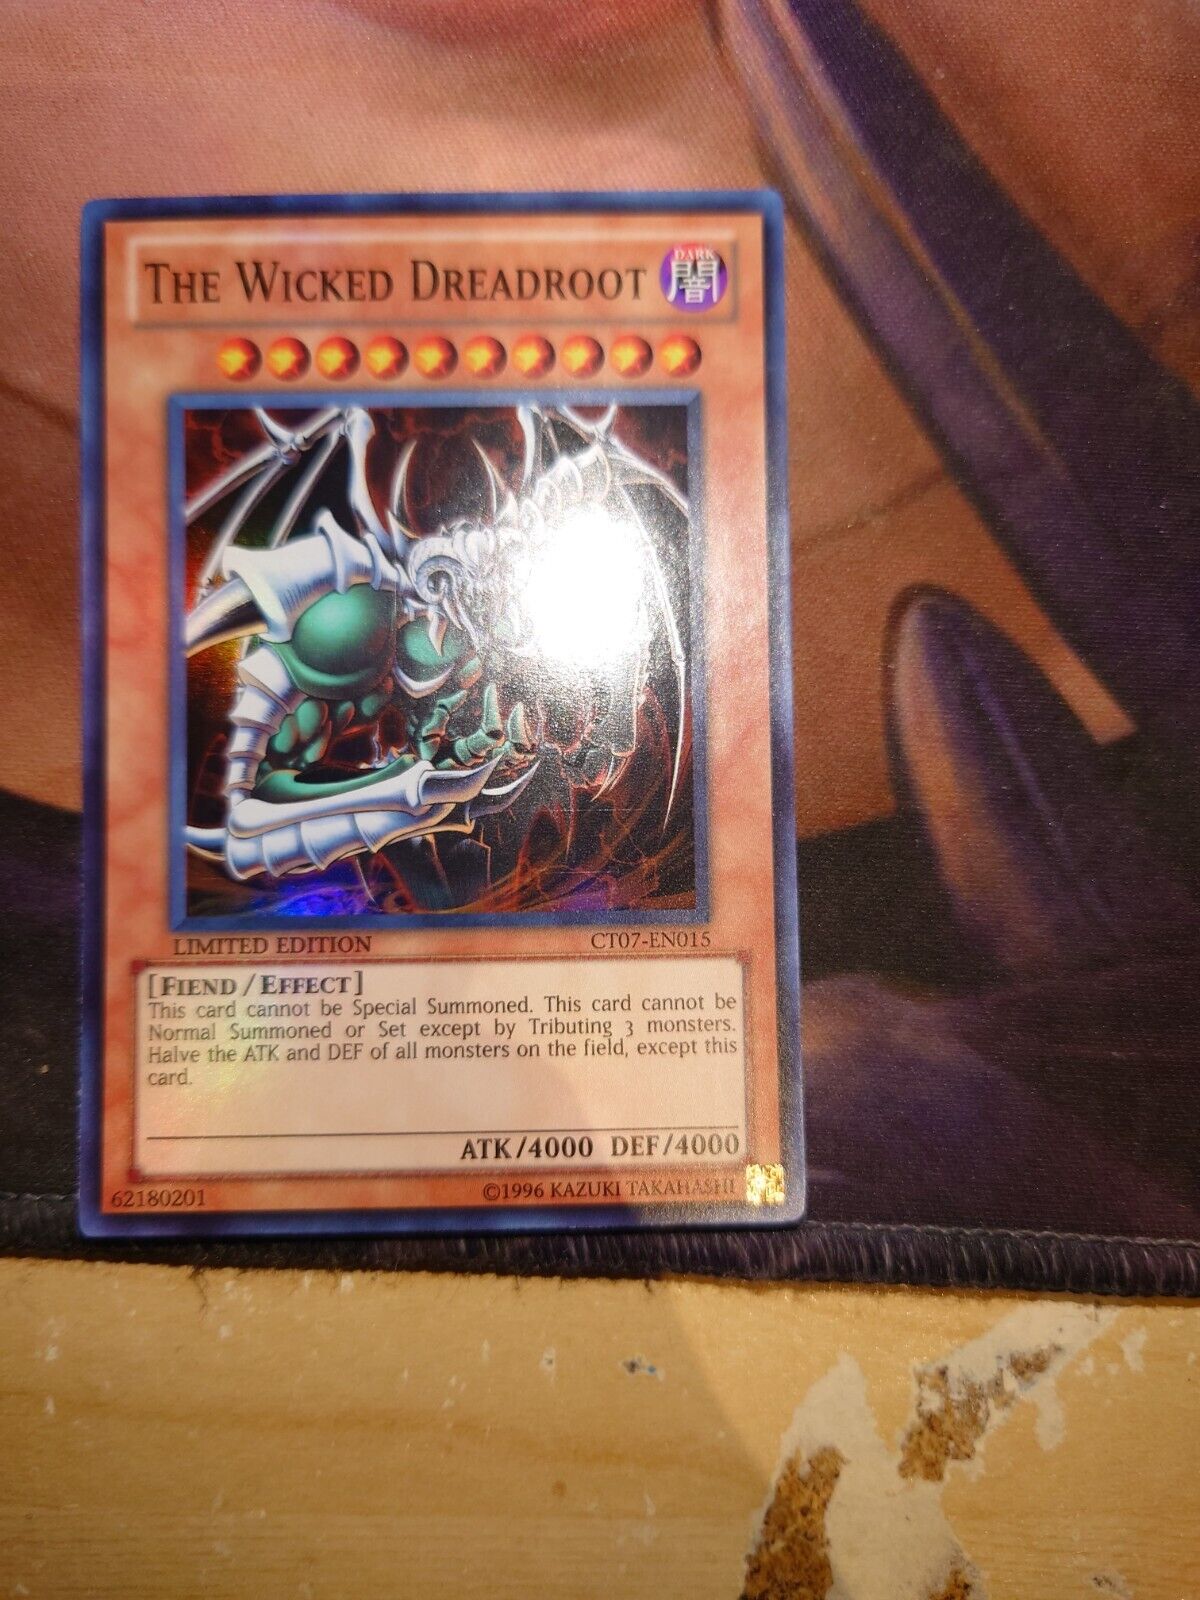 CT07-EN015  The Wicked Dreadroot Super Rare Limited Edition Yugioh Card